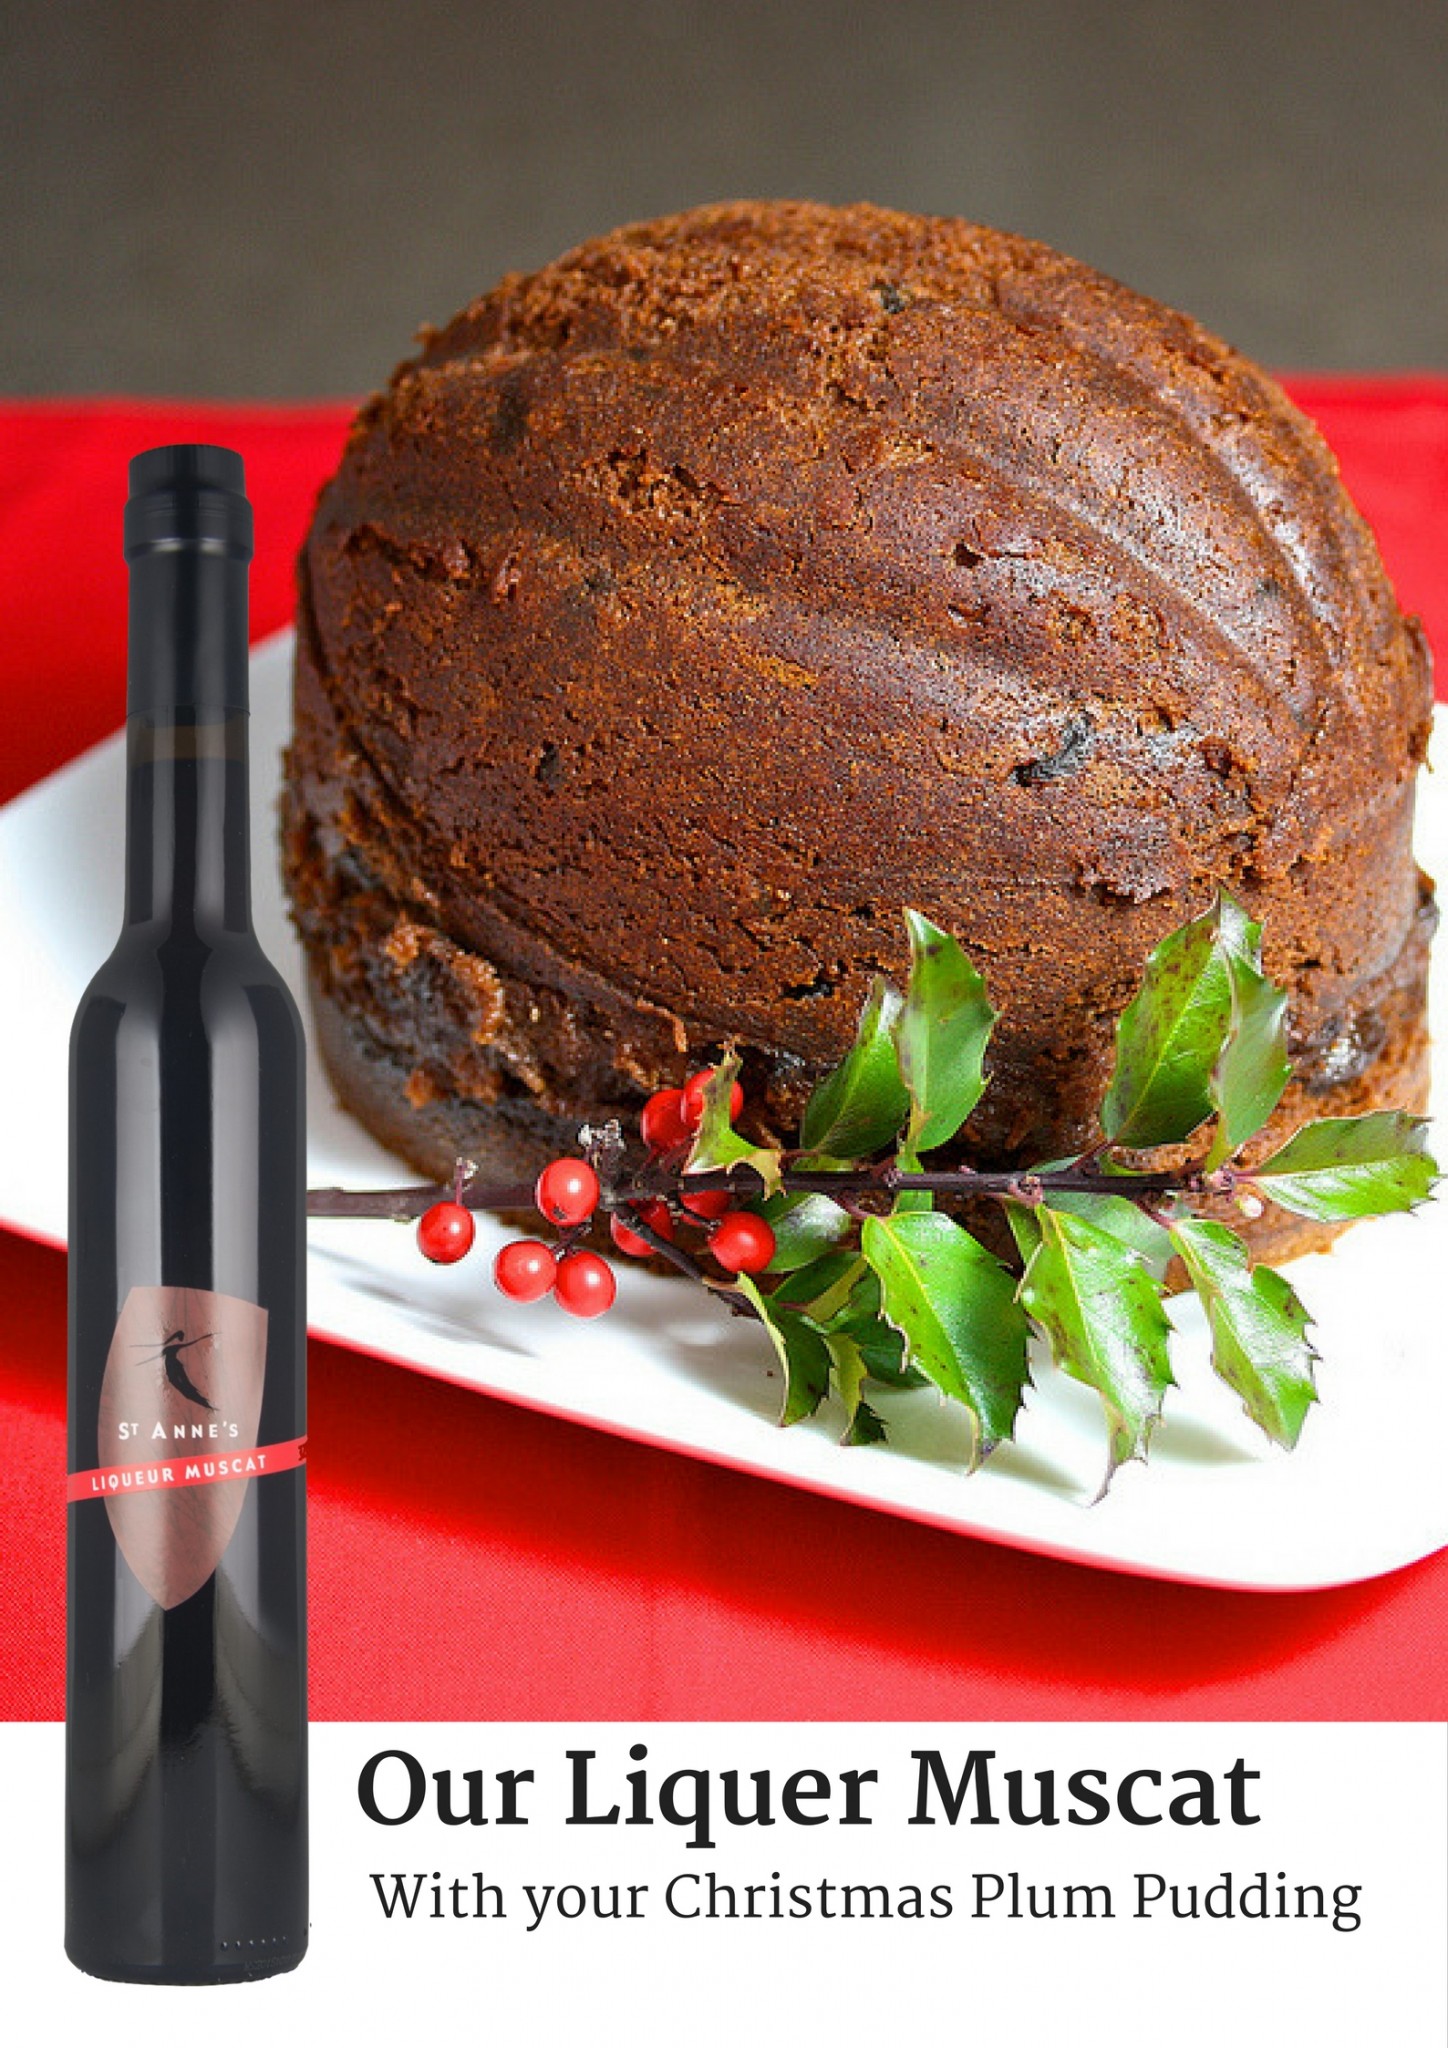 A bottle of liquer muscat superimposed over a christmas pudding.